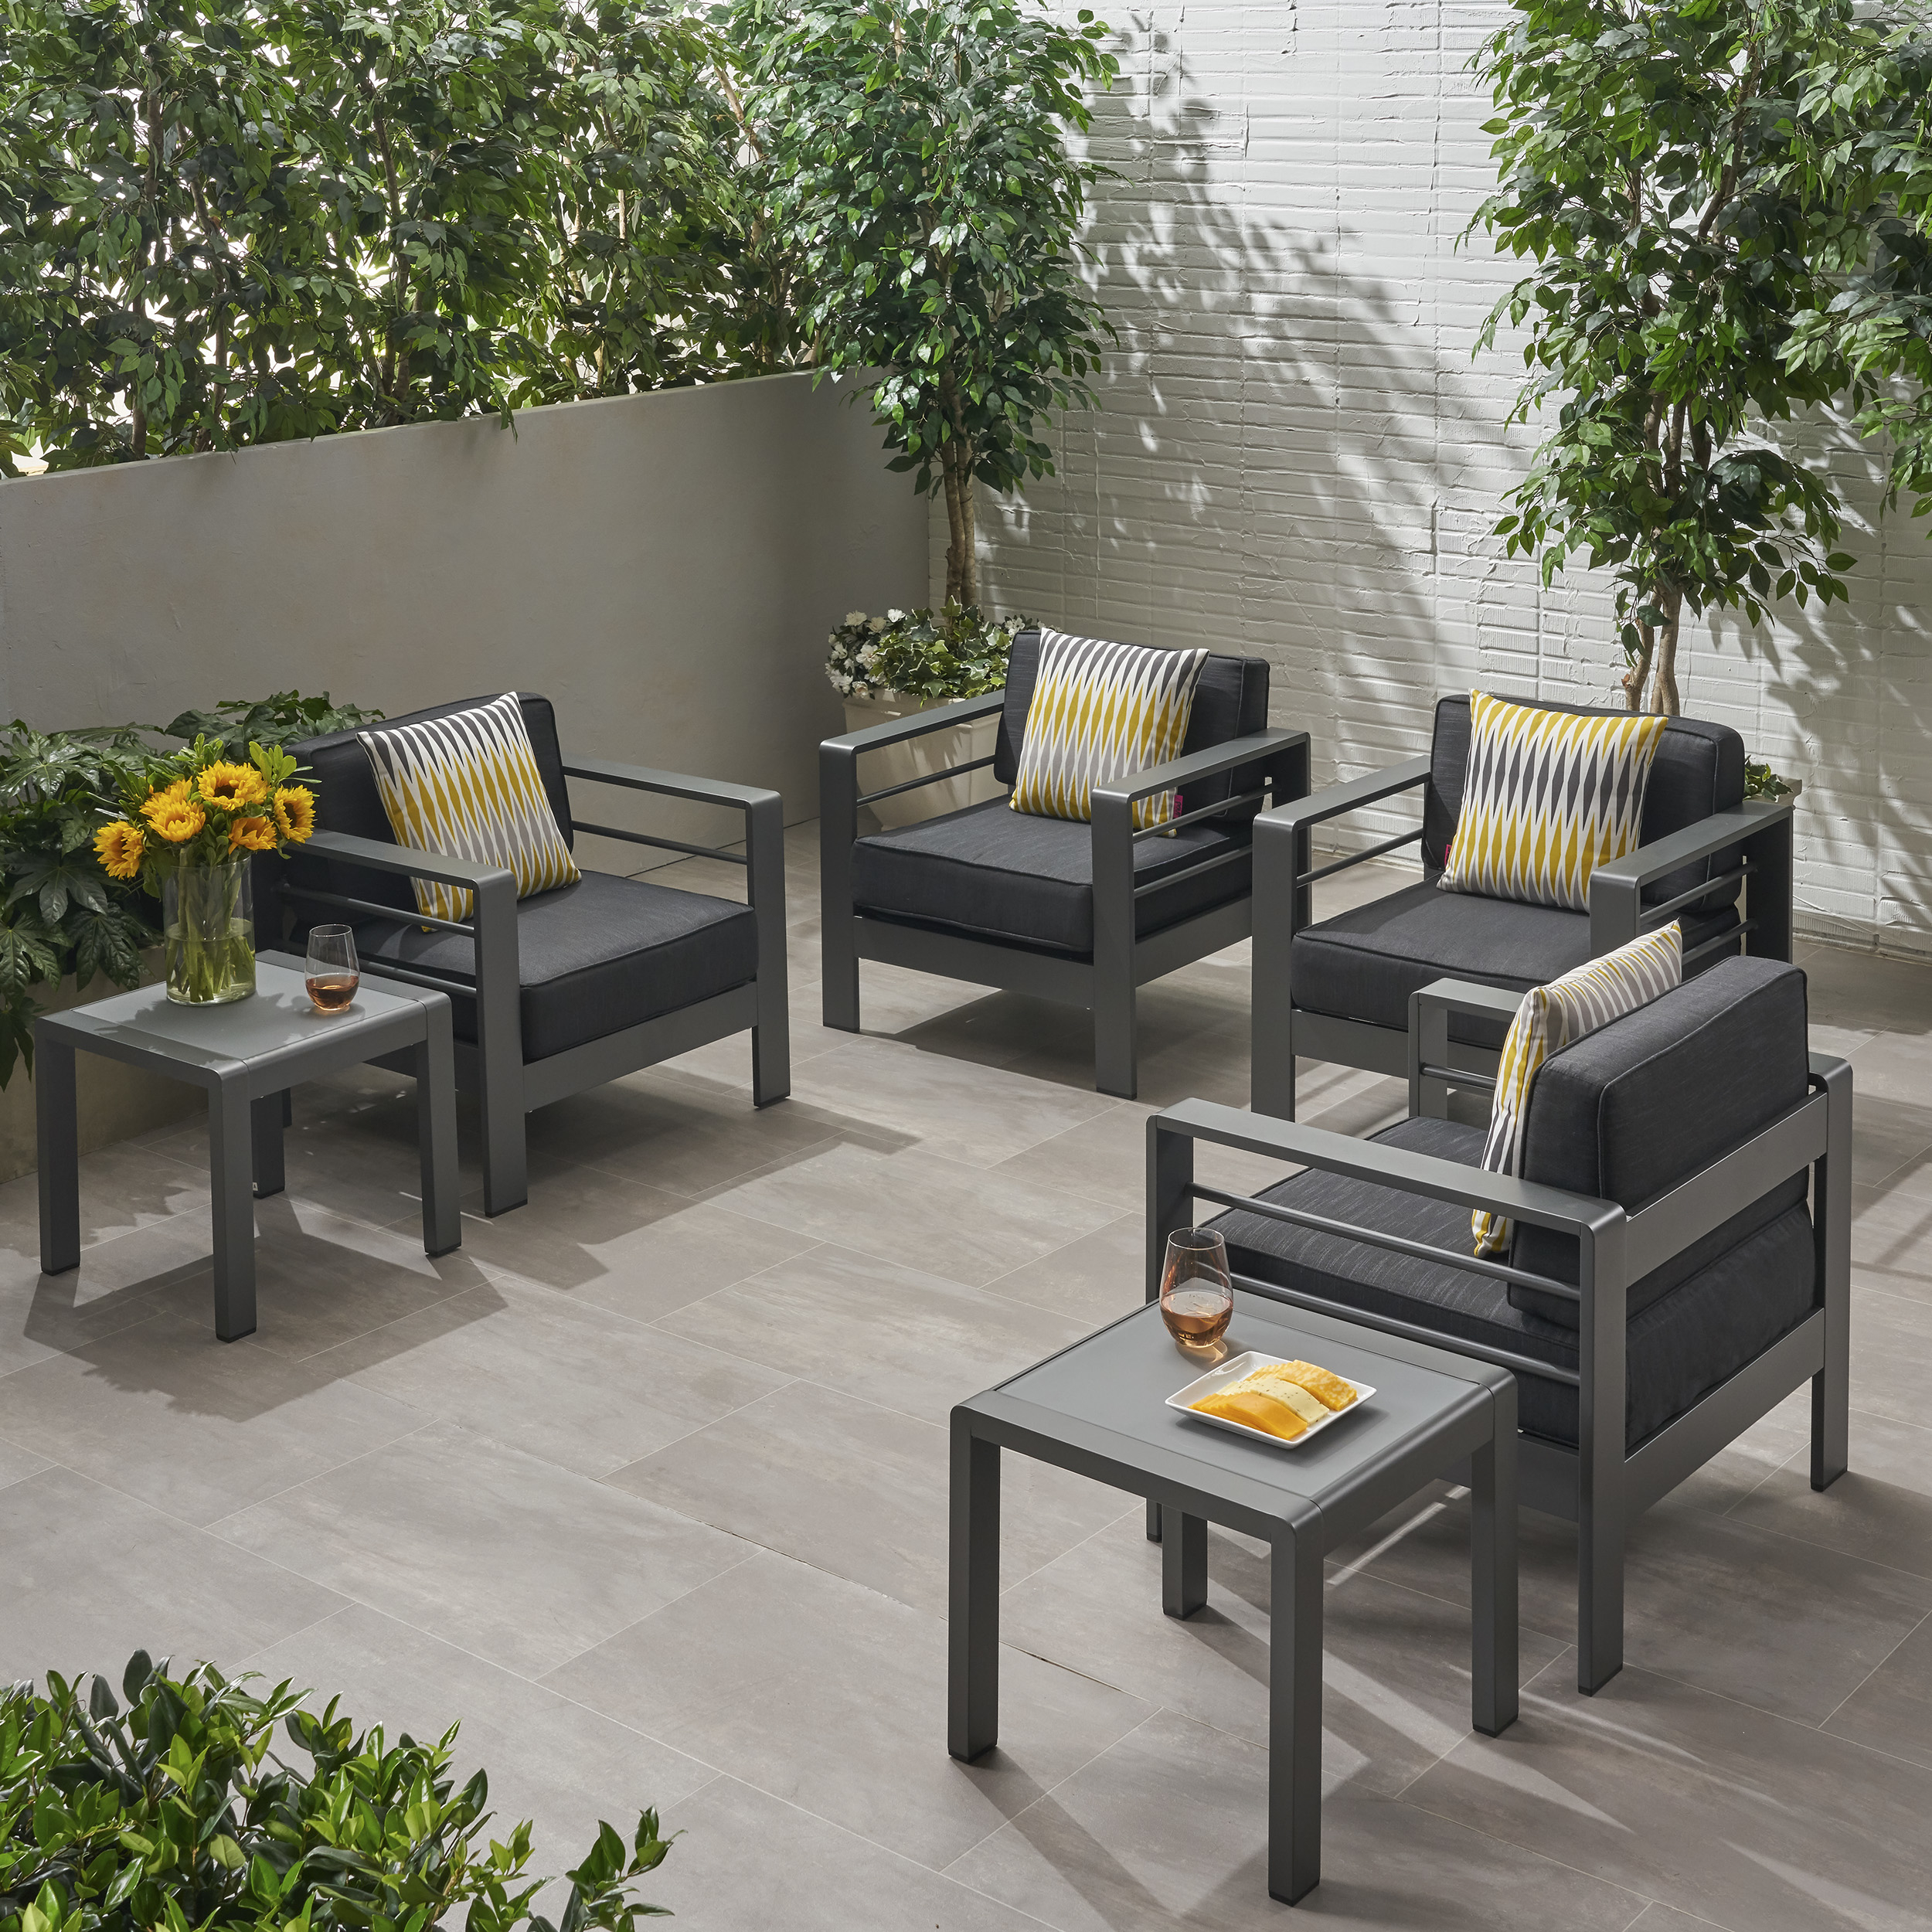 Scalett Coral Outdoor 4 Seater Club Chair And Table Set - Gray, Dark Gray